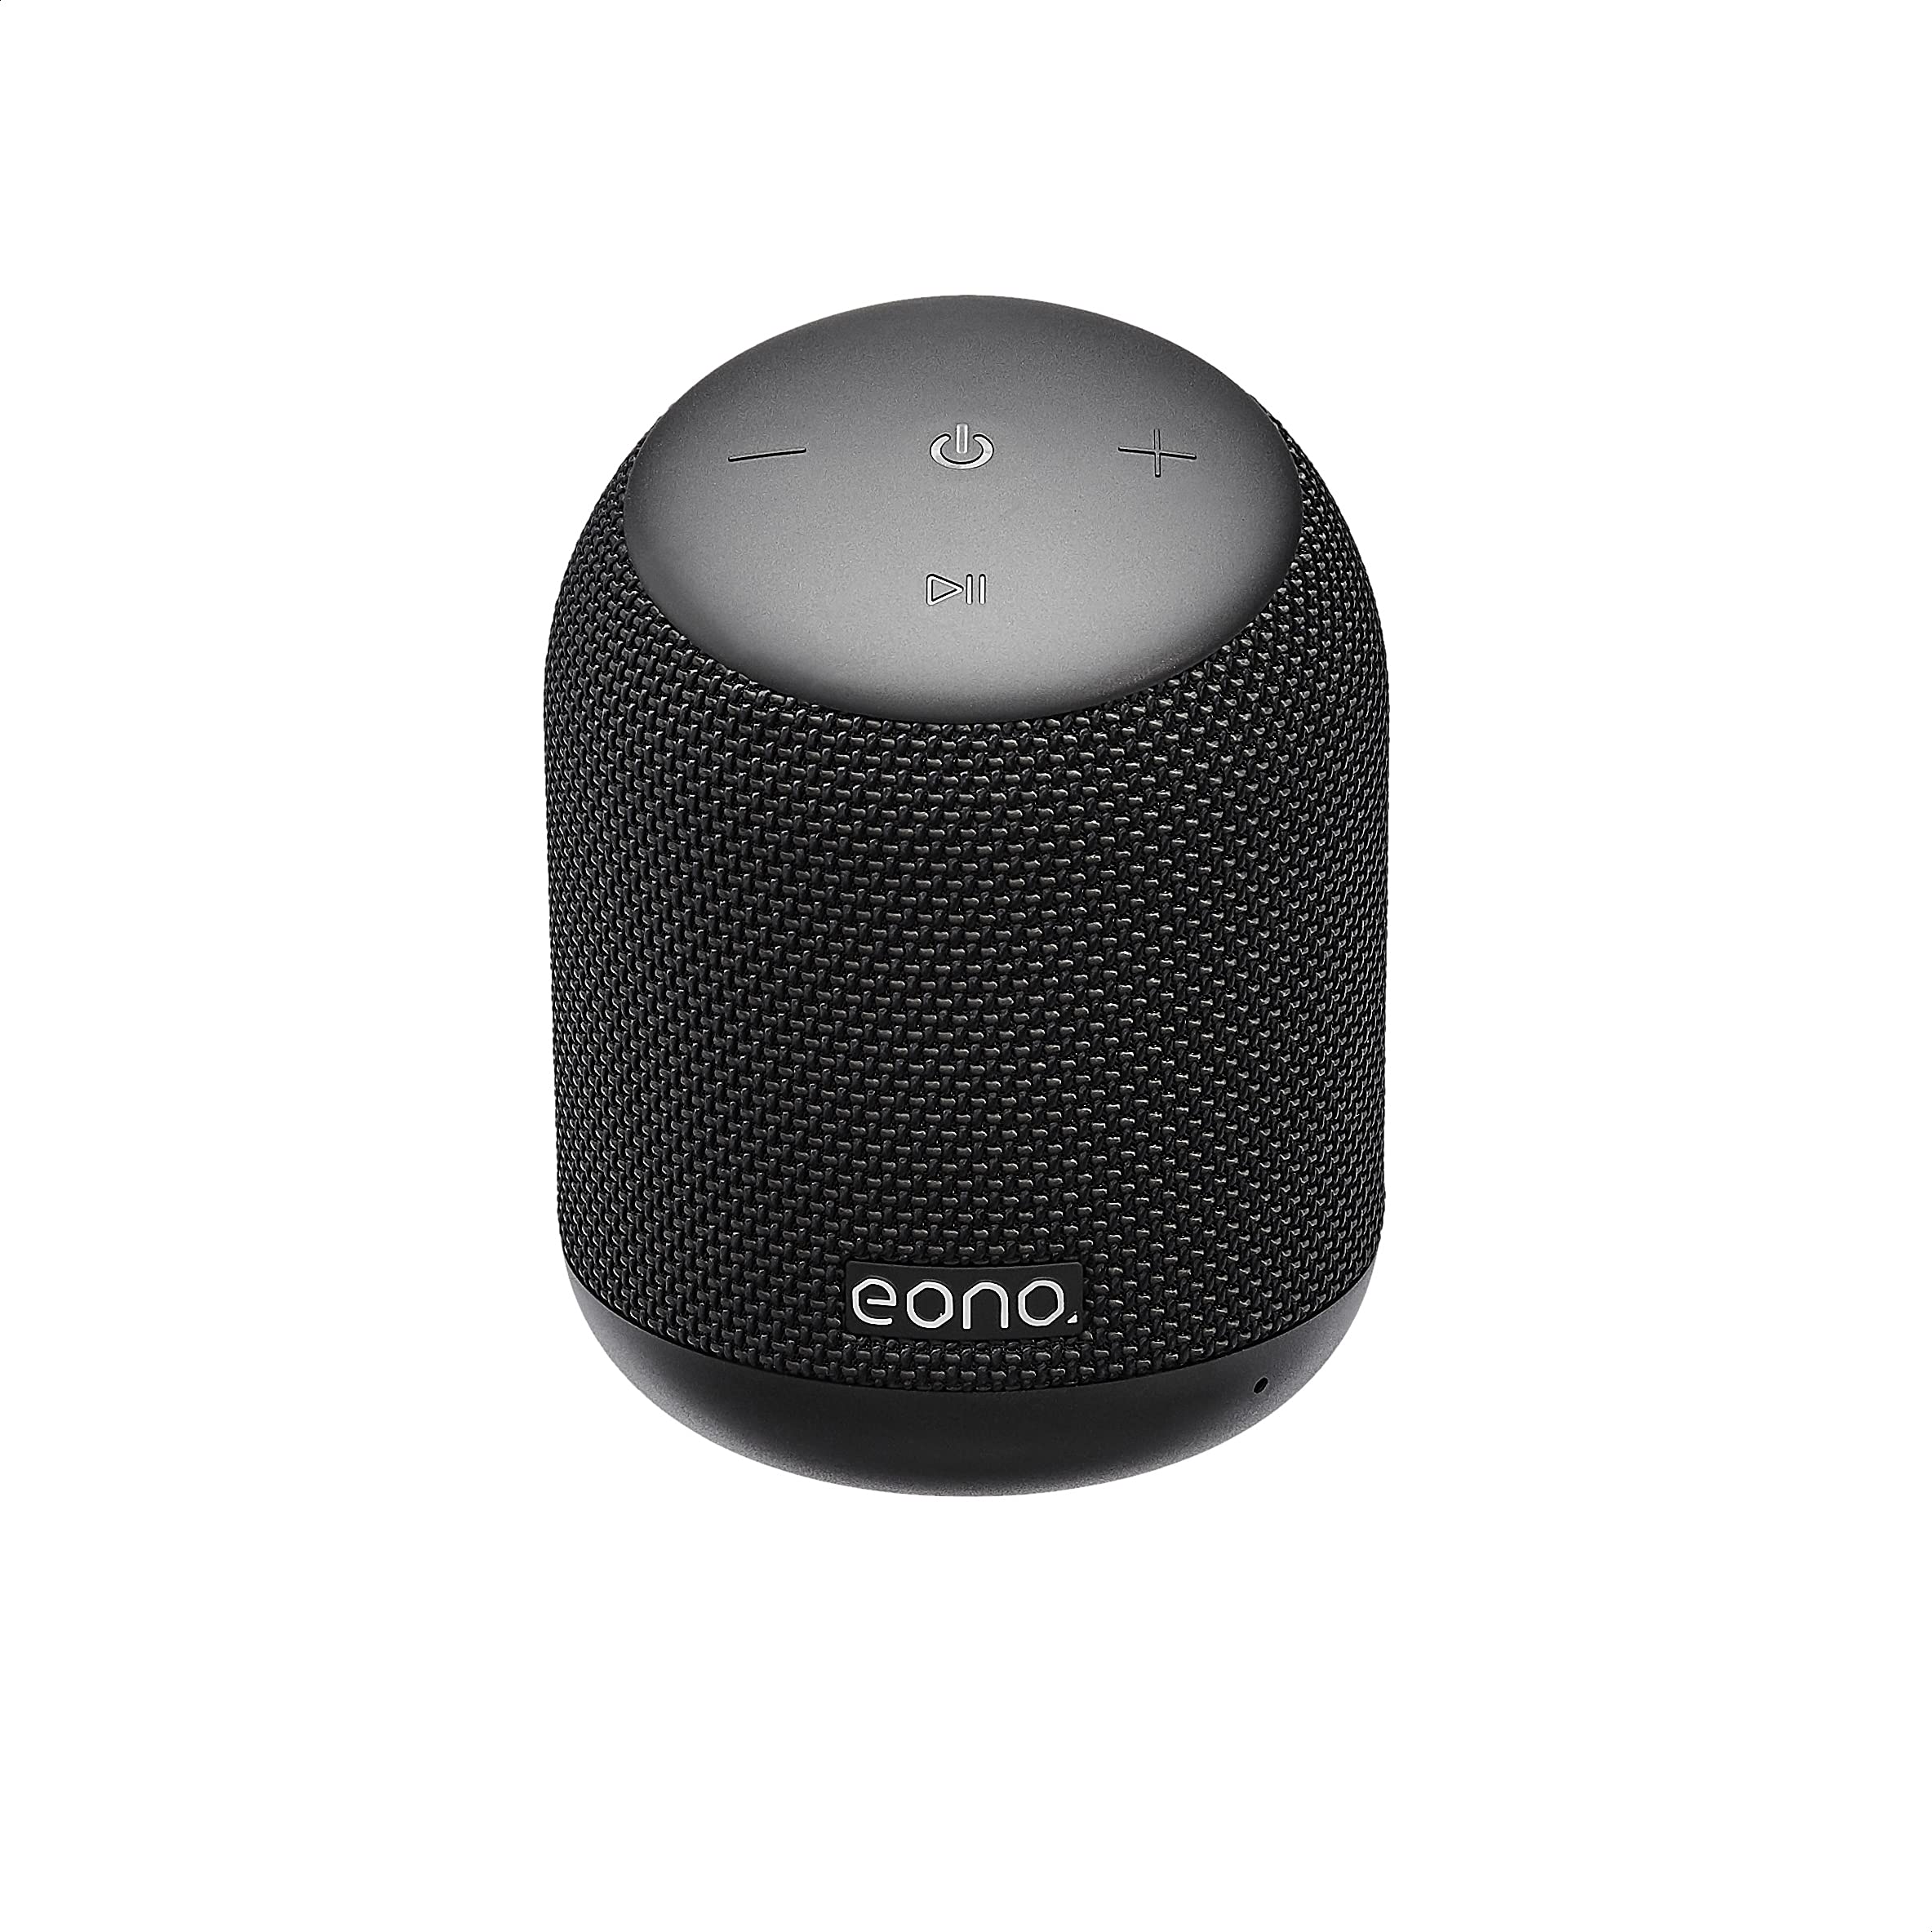 Eono by Amazon - Bluetooth IPX7 Waterproof Speaker with HARMAN Sound Technology, 10 Hours of Playtime, Deep Bass Sound, Siri and Google Compatible, Speakerphone